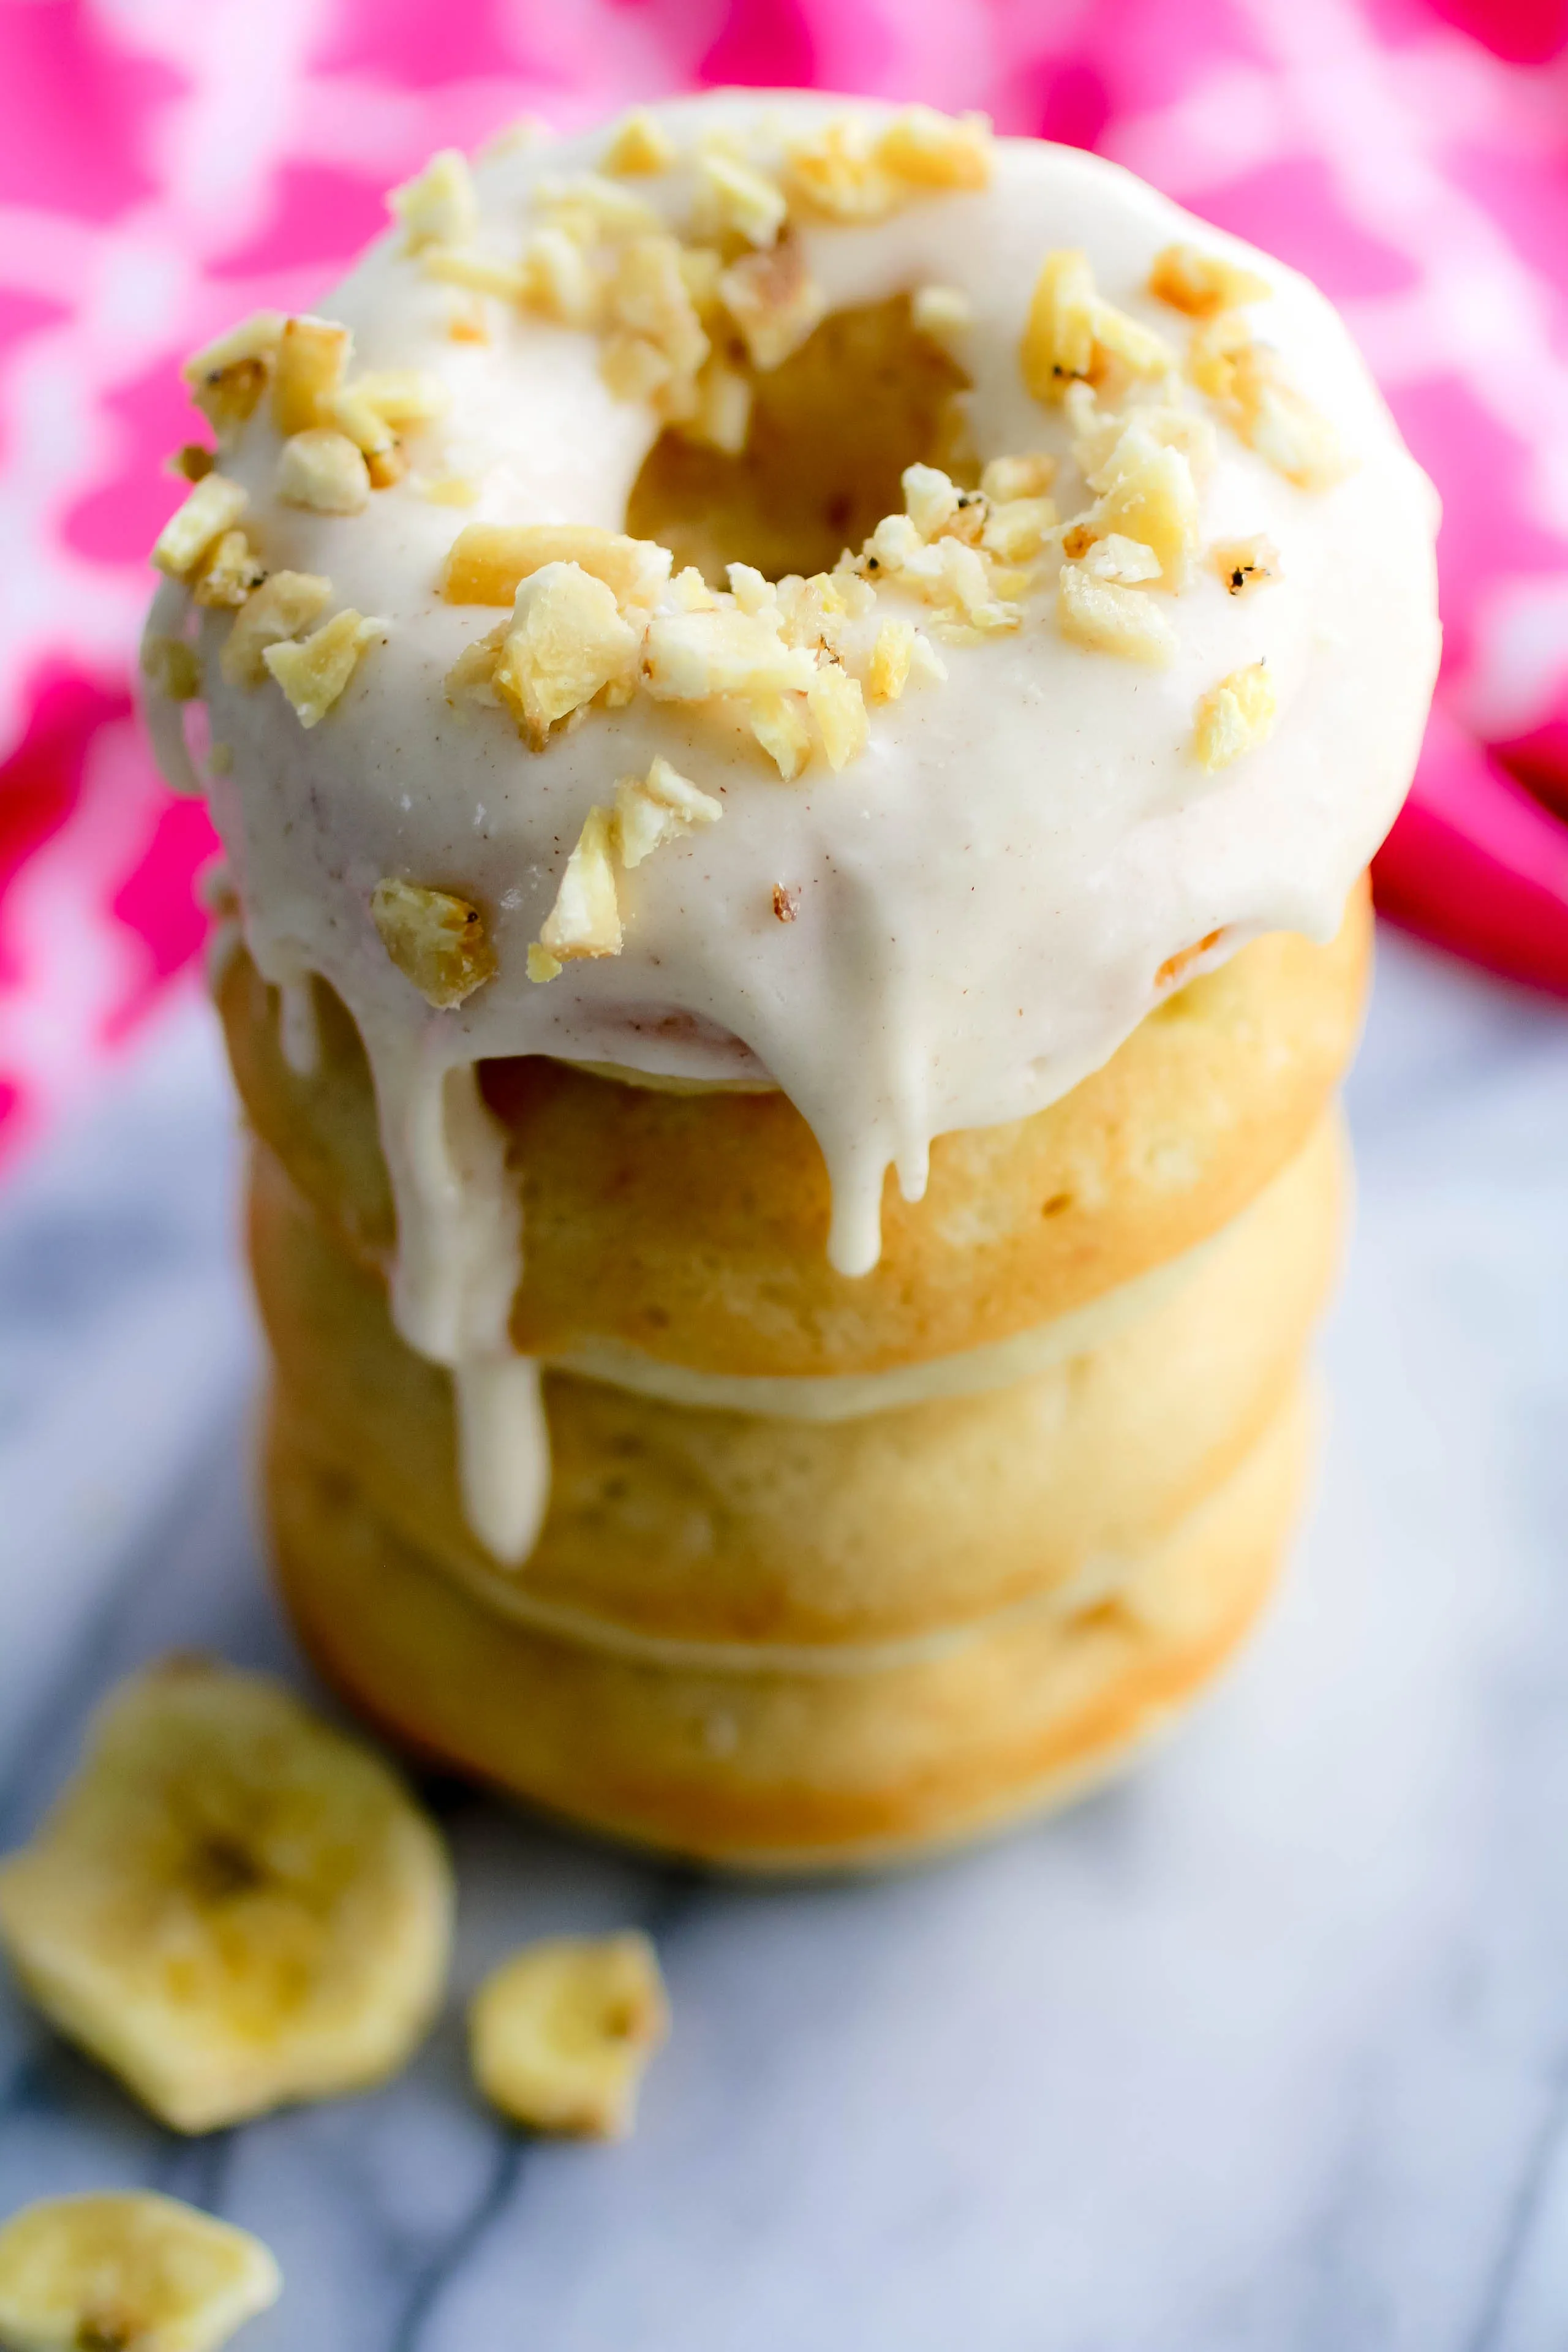 Banana Donuts with Cinnamon Cream Cheese Frosting are an amazing dessert! Try Banana Donuts with Cinnamon Cream Cheese Frosting for a baked treat you'll love!